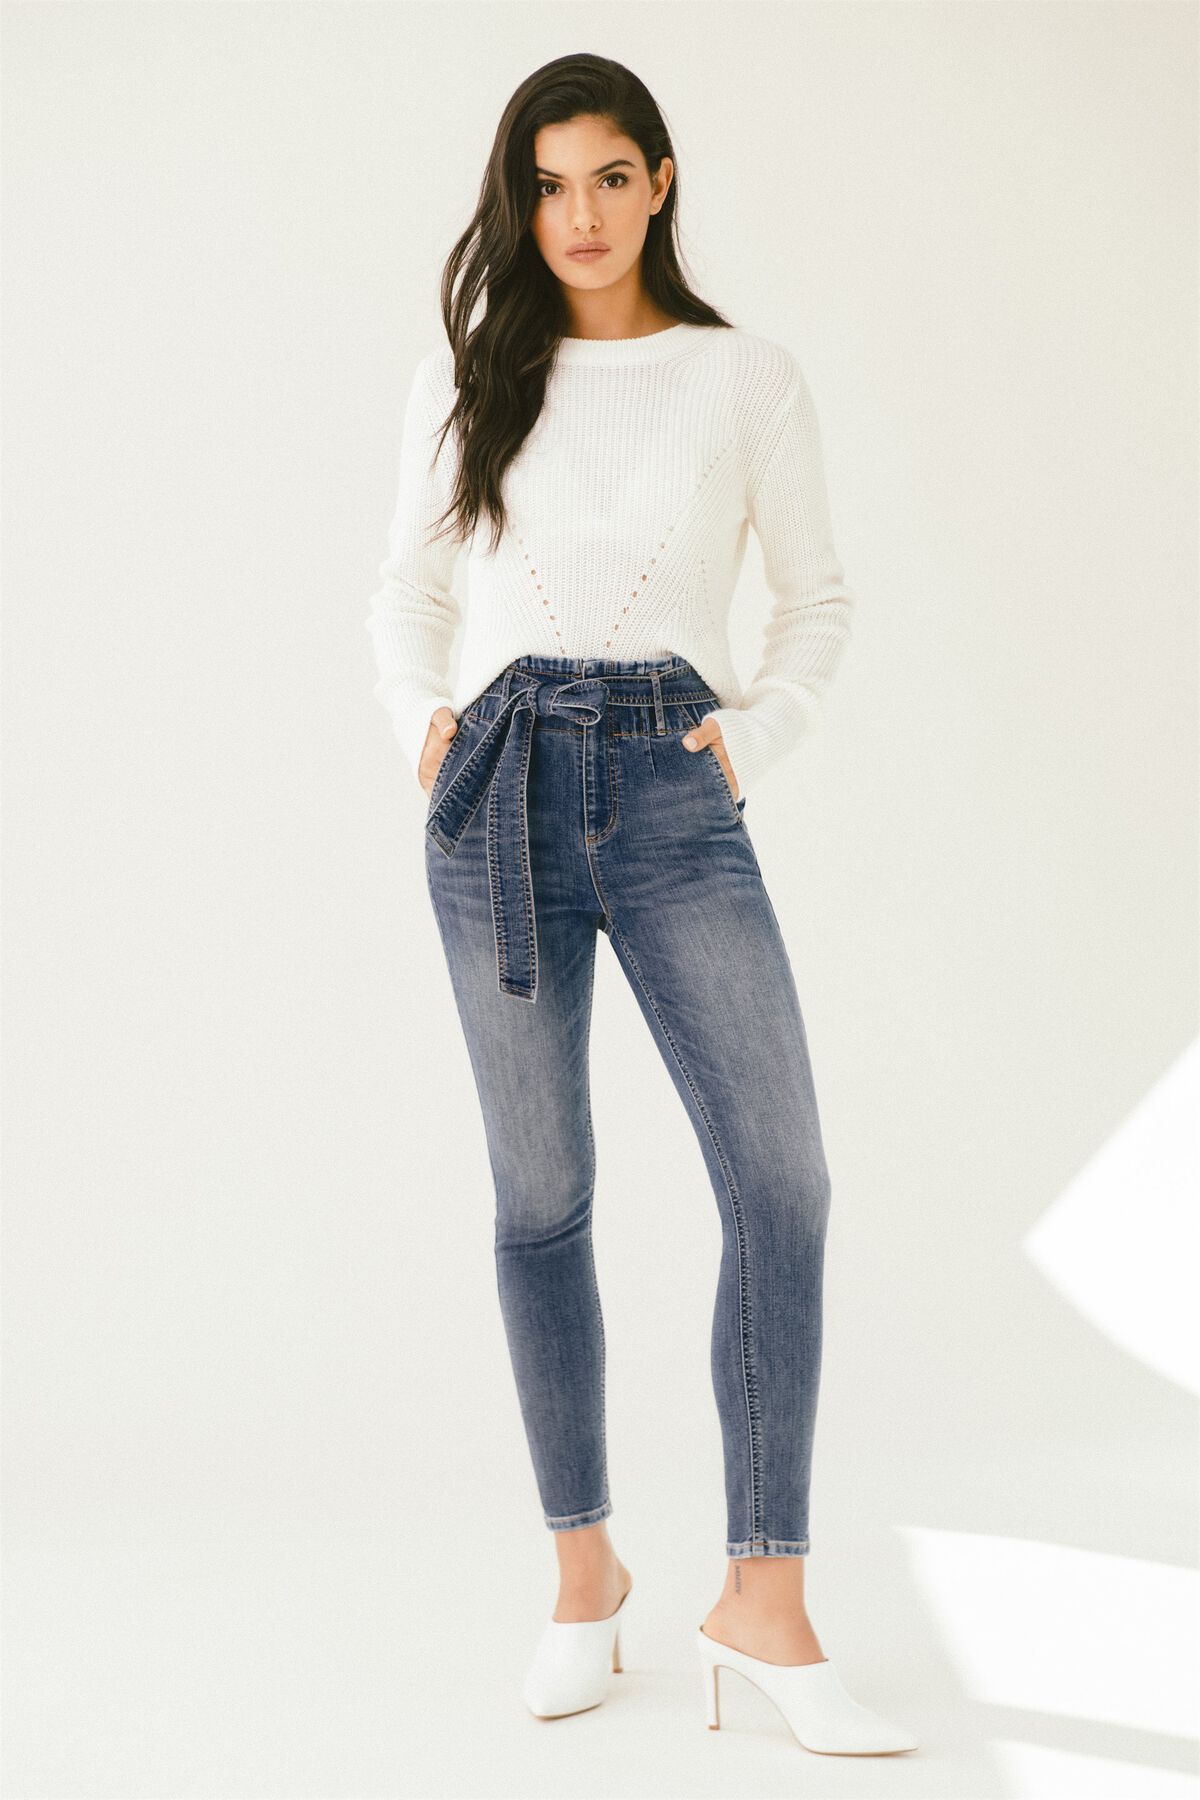 Dynamite Ultra-High Rise Kate Ankle Skinny Jeans - Final Sale. 2